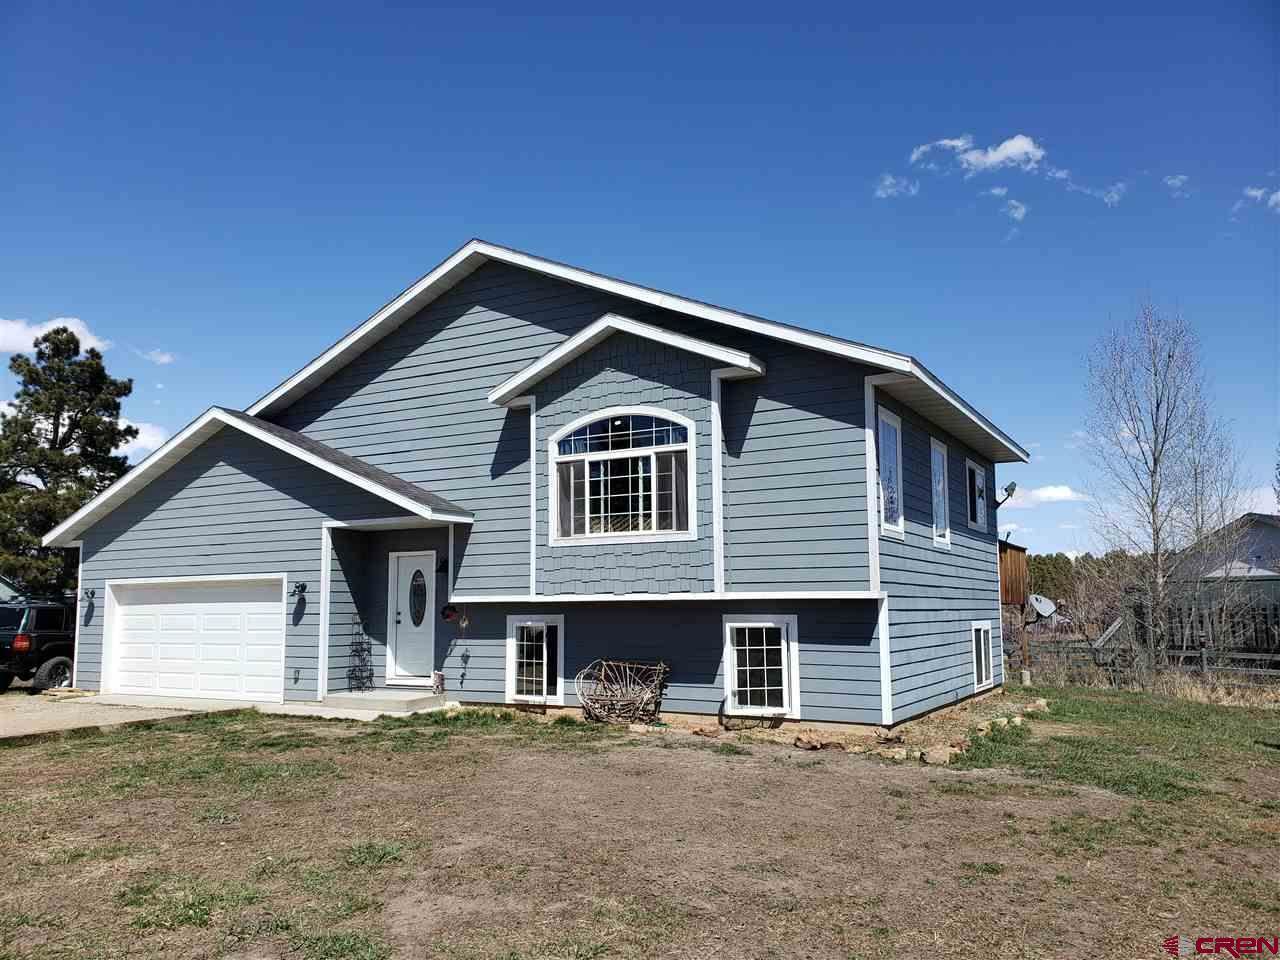 59 Roosevelt Drive, Pagosa Springs, CO 81147